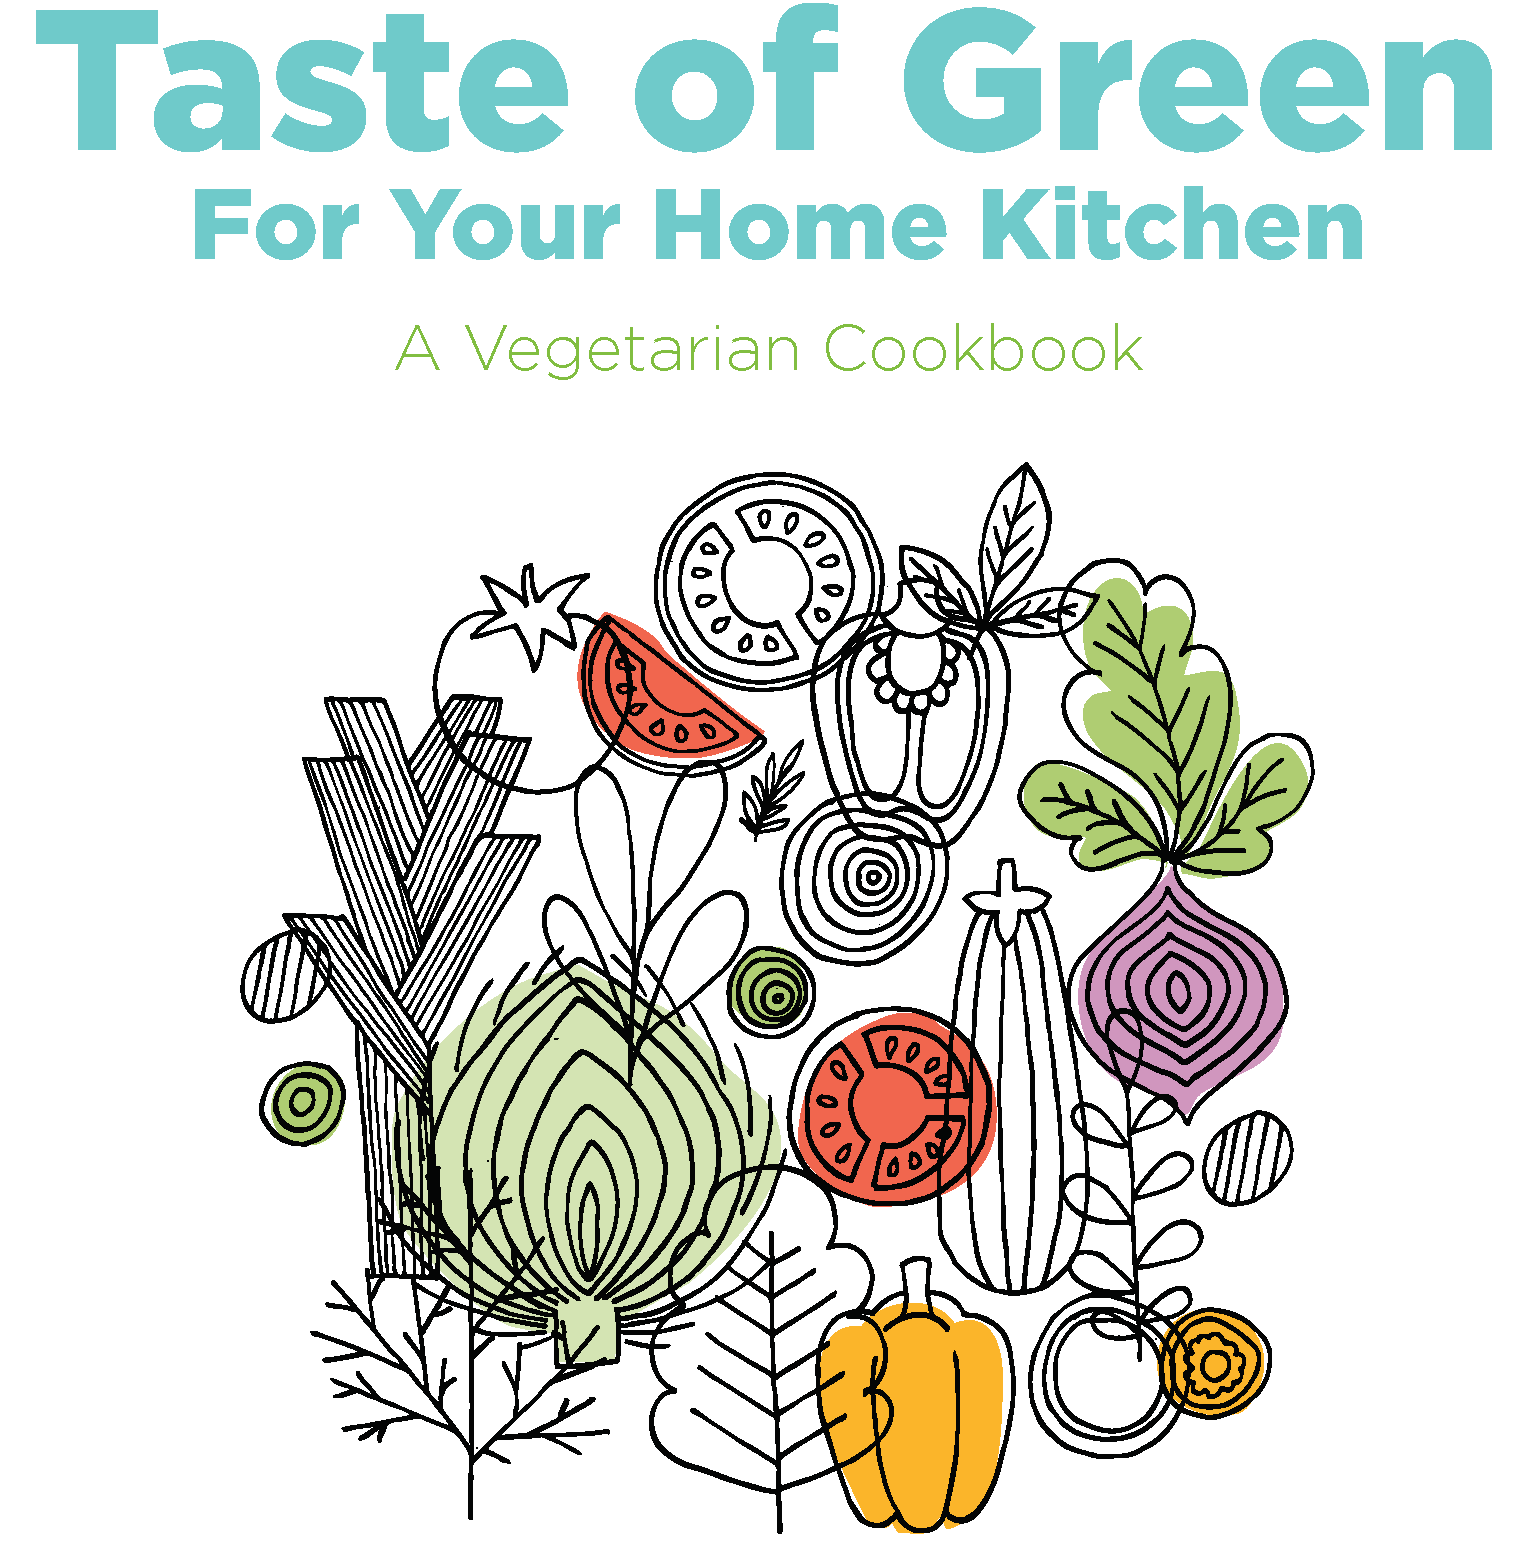 Taste of Green earthday365 Vegetarian Cookbook title page with food stenciled graphics